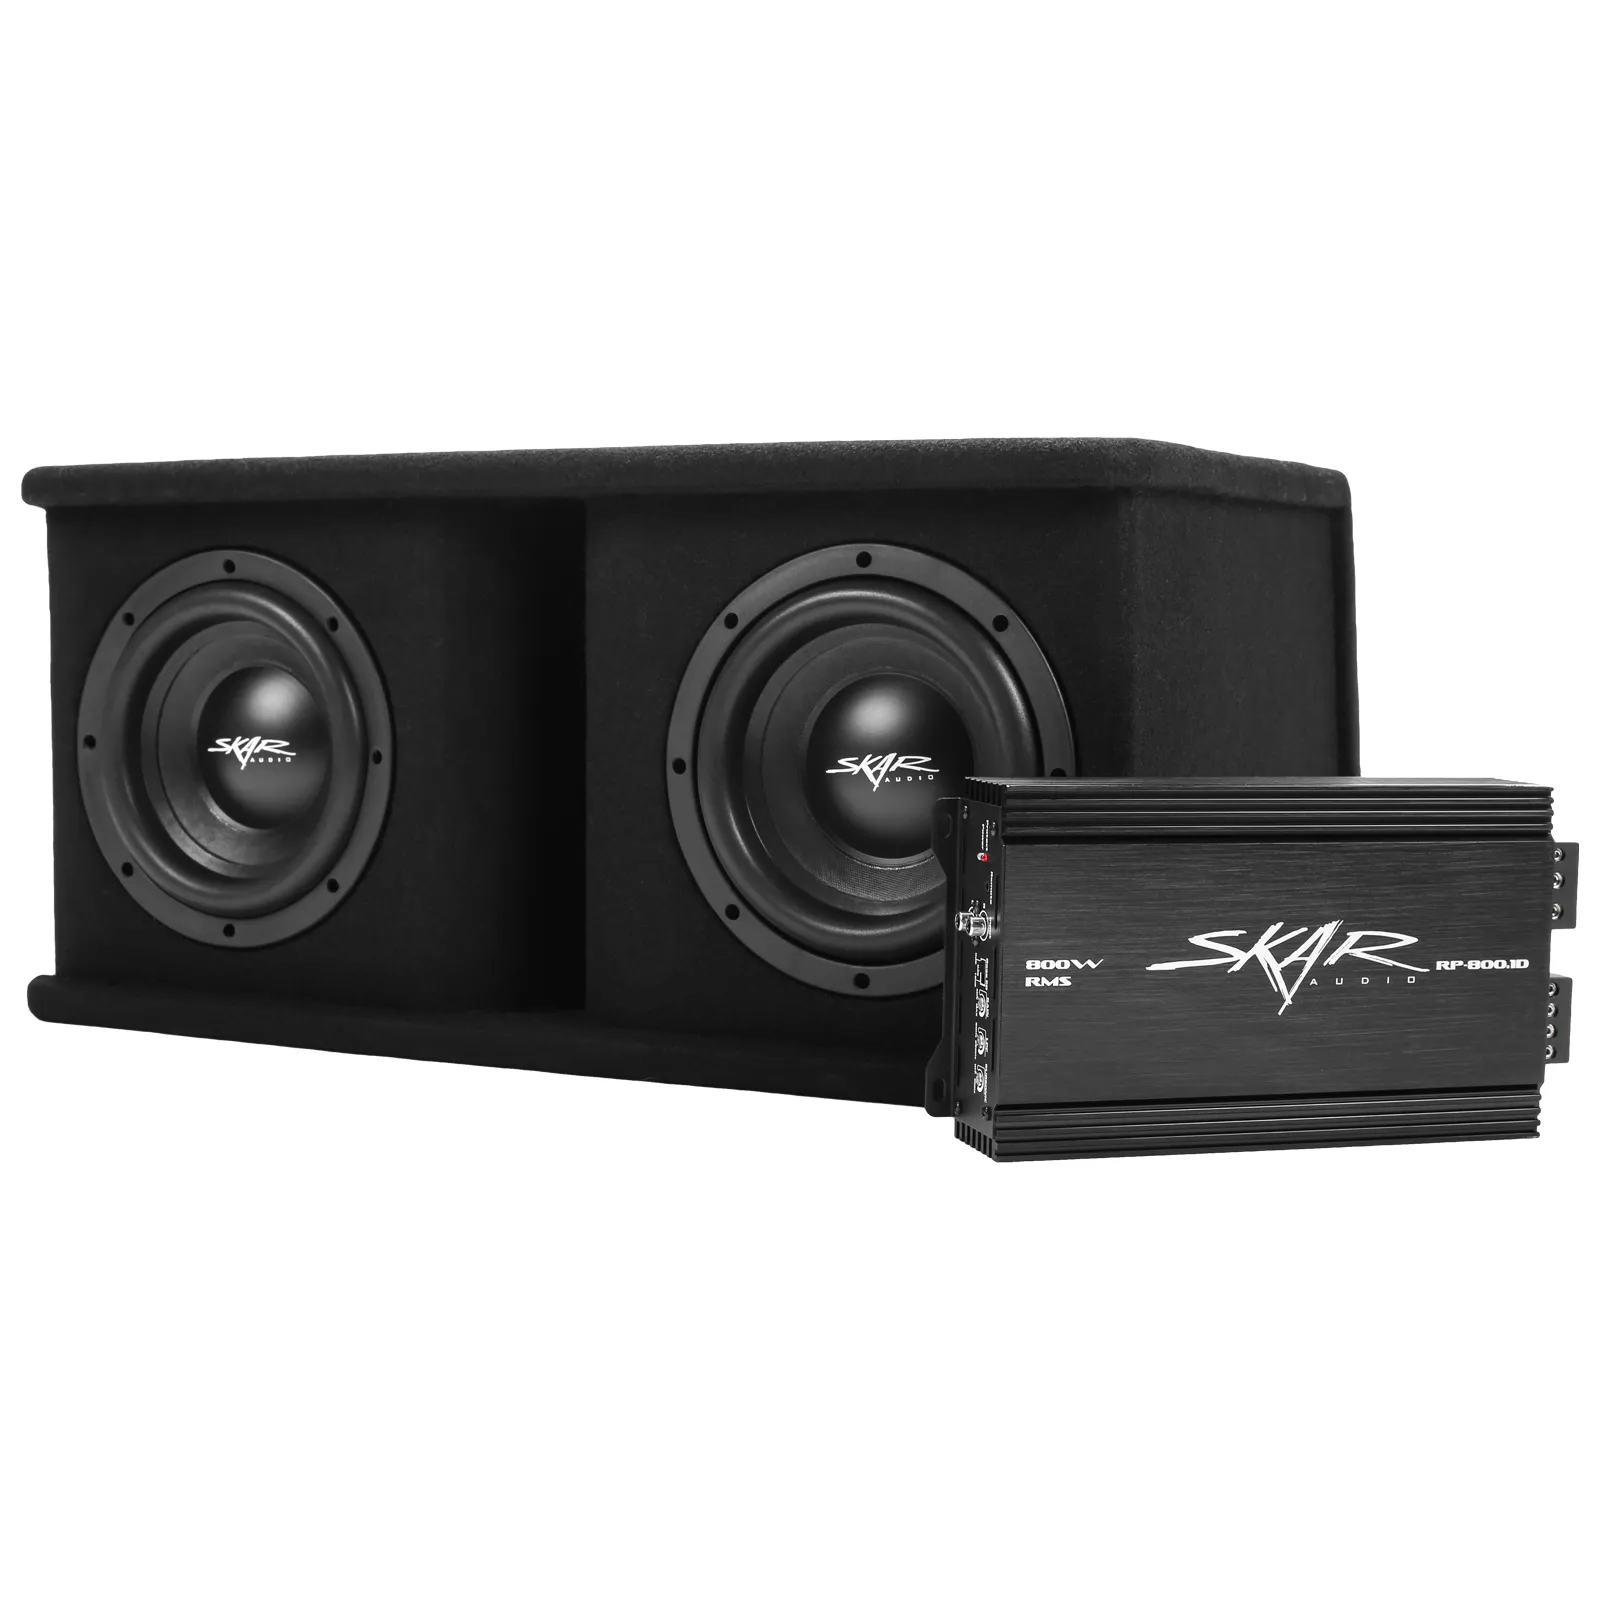 Dual 8" 1,400 Watt SDR Series Complete Subwoofer Package with Vented Enclosure and Amplifier #2